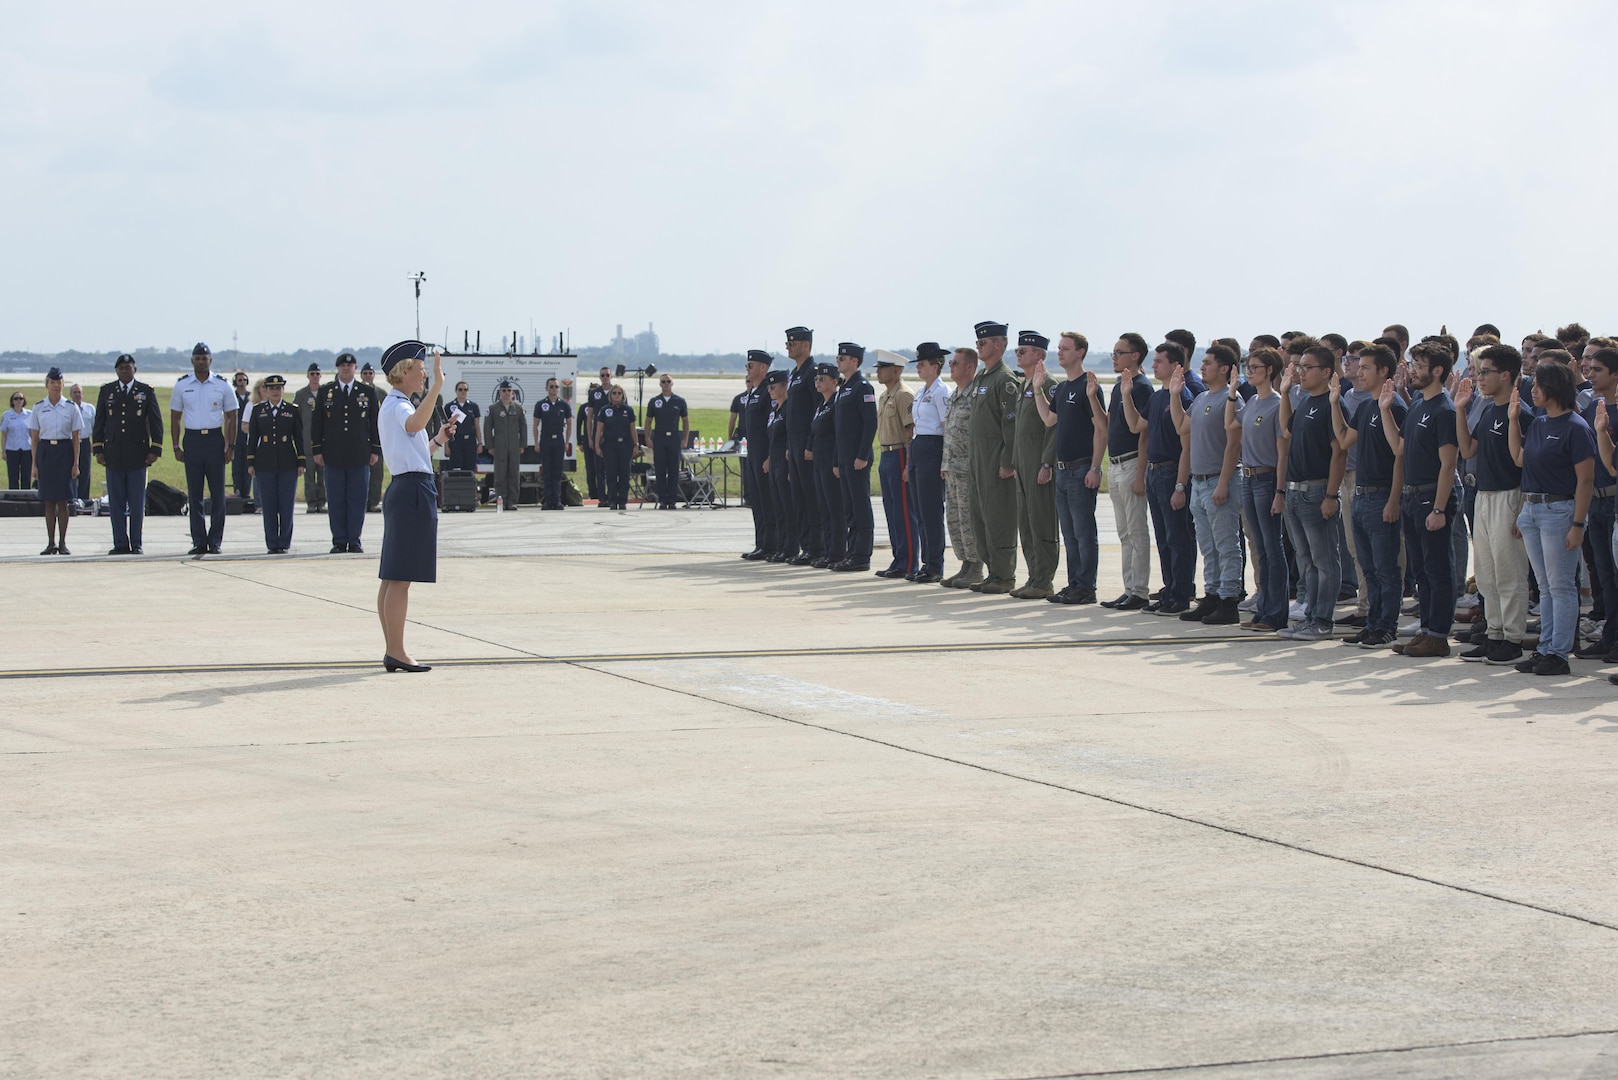 Brig. Gen. Heather Pringle, 502nd Air Base Wing and Joint Base San Antonio commander, issues the Oath of Enlistment to new men and women joining the Army, Air Force, Navy, Marine Corps and Coast Guard during the JBSA Air Show and Open House Nov. 4, 2017, at JBSA-Lackland, Kelly Field. Air Shows allow the Air Force to display the capapbilities of our aircraft to the American Public through aerial demonstration and static displays.